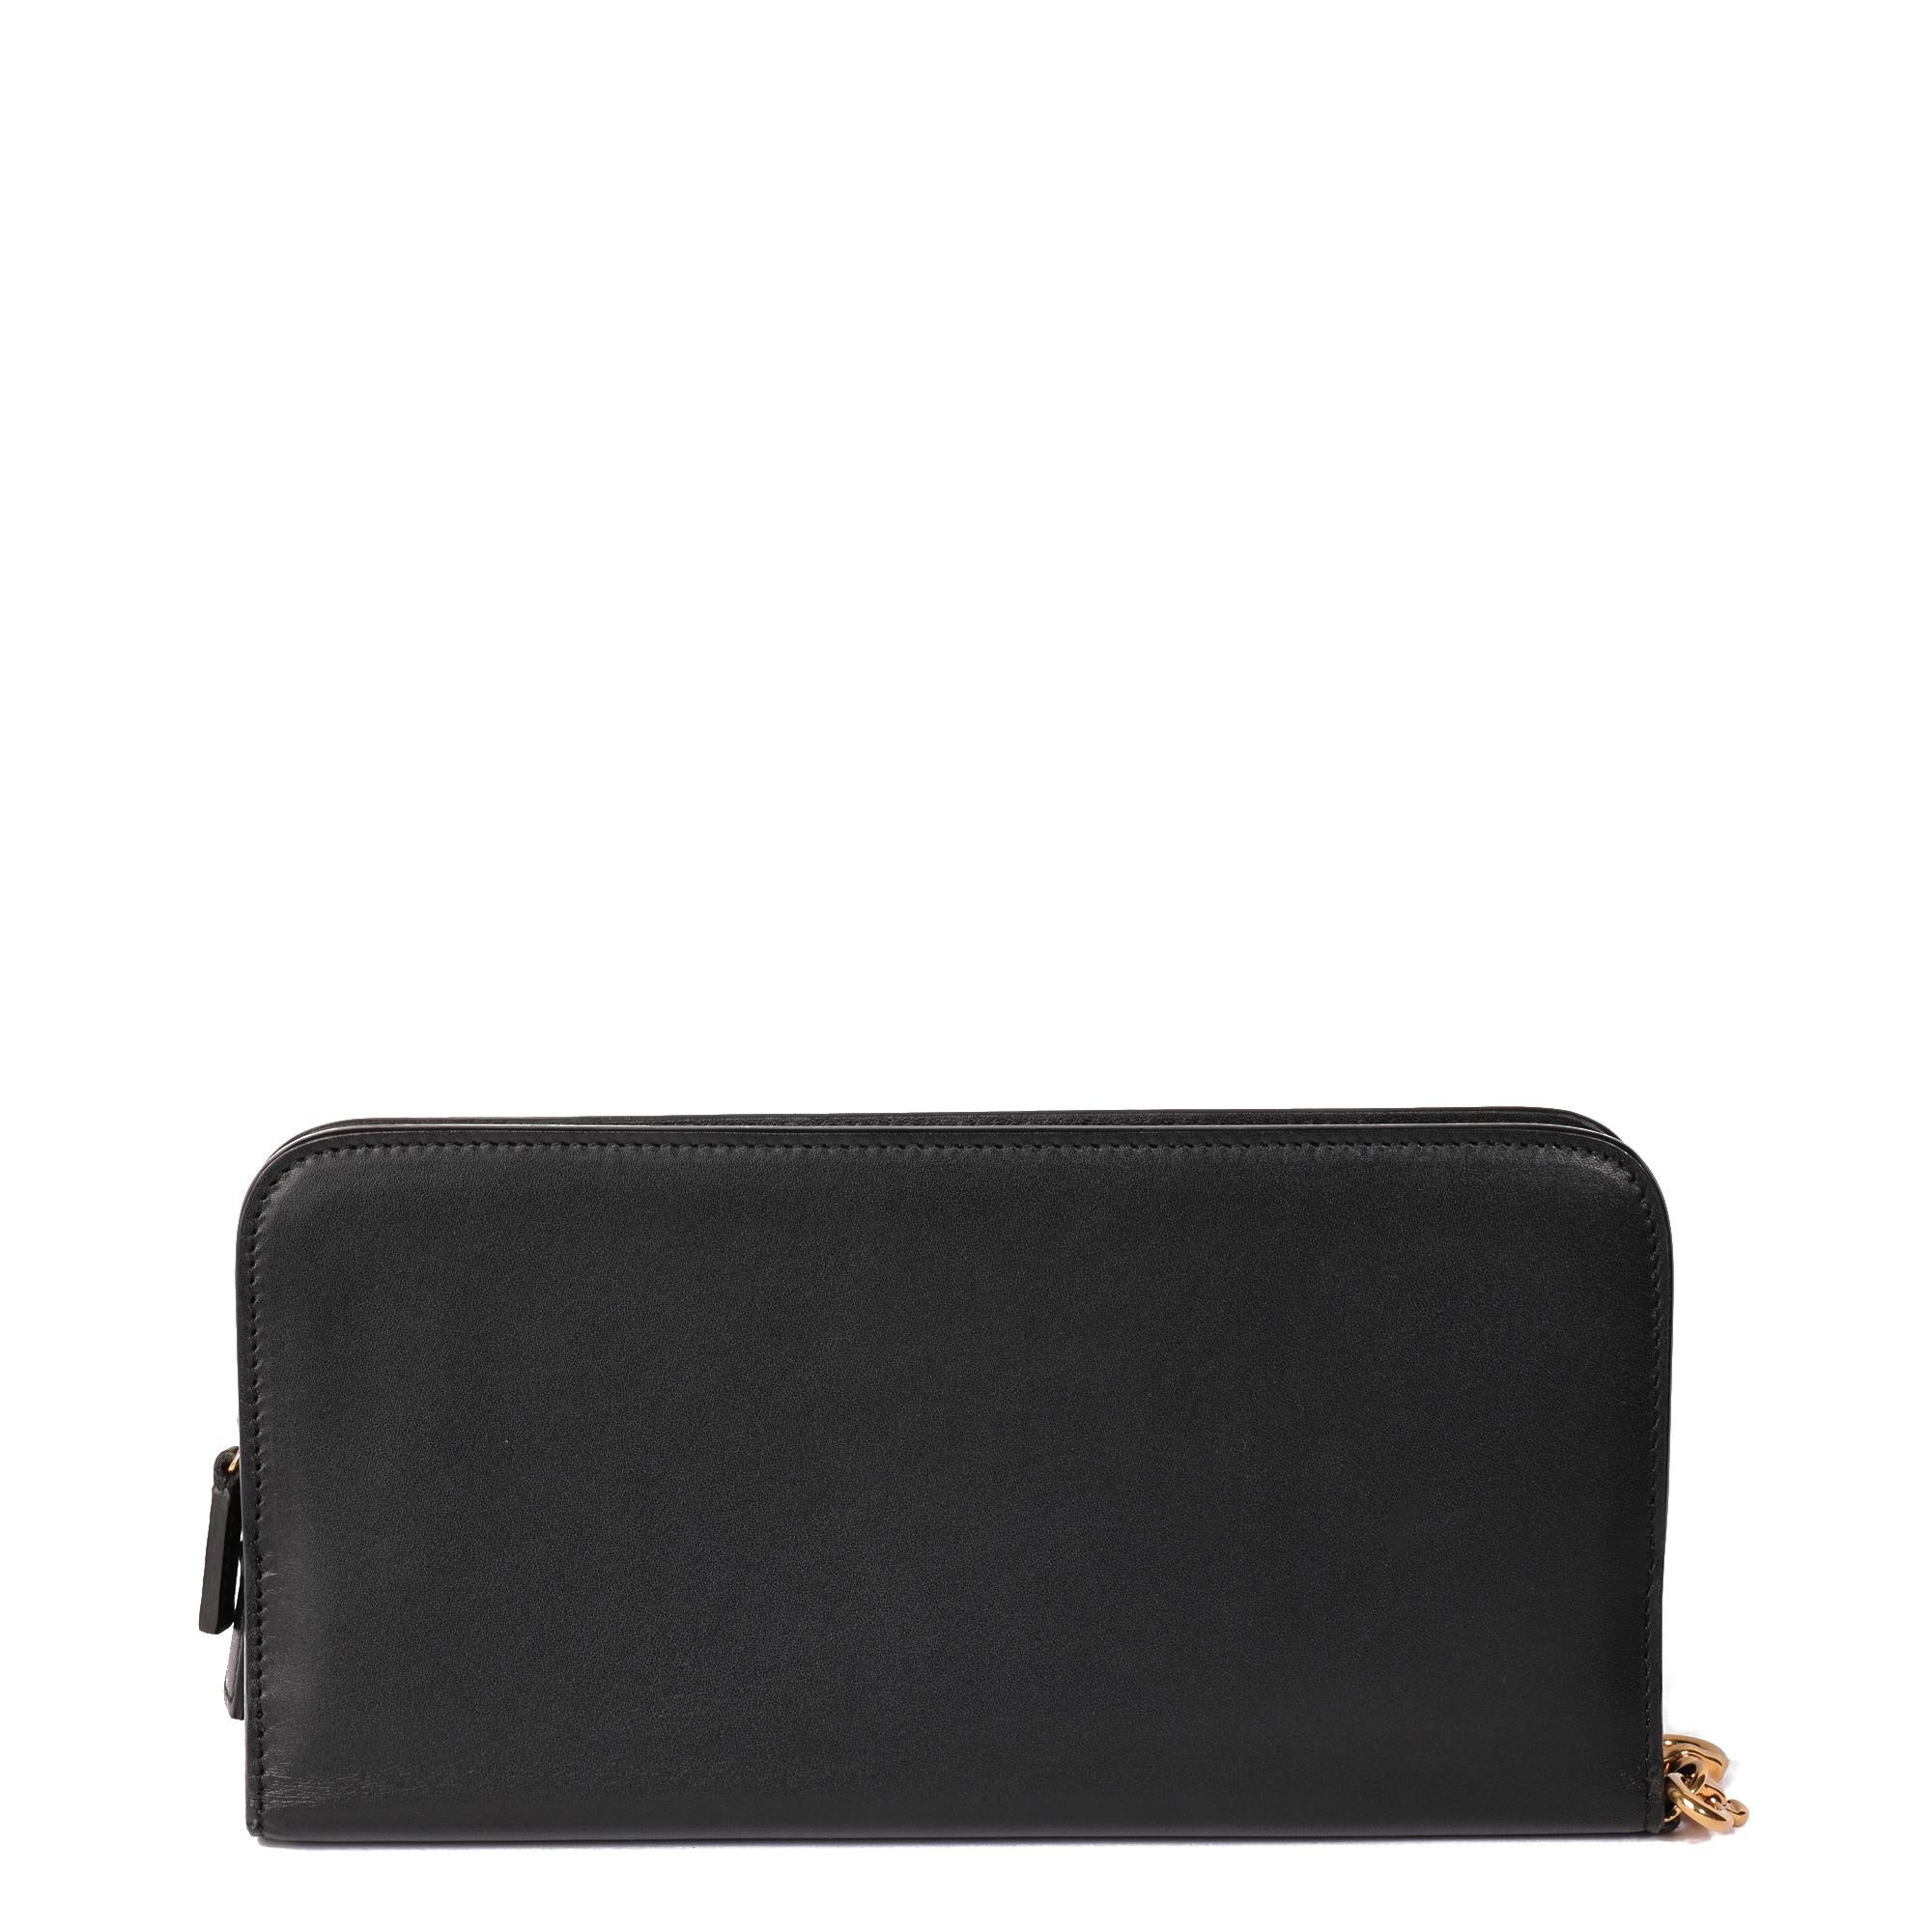 Saint Laurent Black Grain De Poudre Zip Around Wallet With Strap

CONDITION NOTES
The exterior is excellent condition with light signs of use.
The interior is in excellent condition with light signs of use.
The hardware is in excellent condition